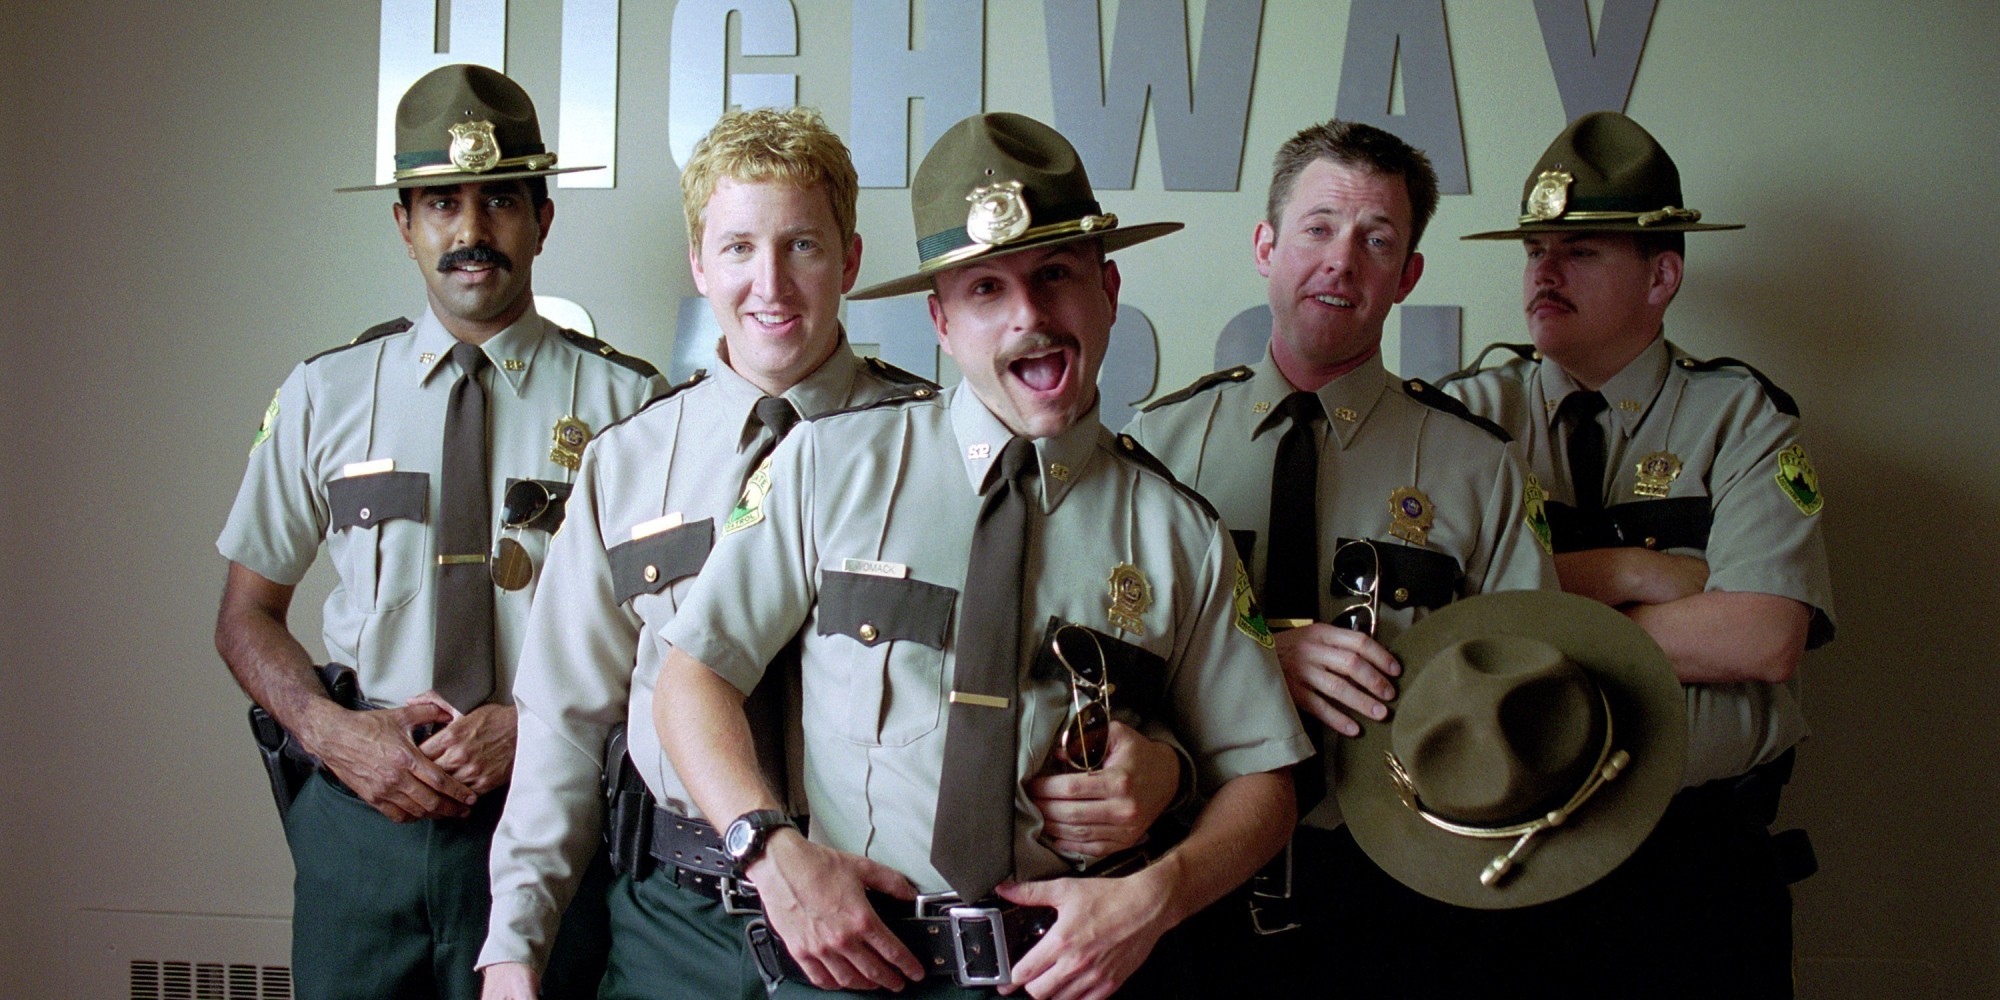 Nice Images Collection: Super Troopers Desktop Wallpapers